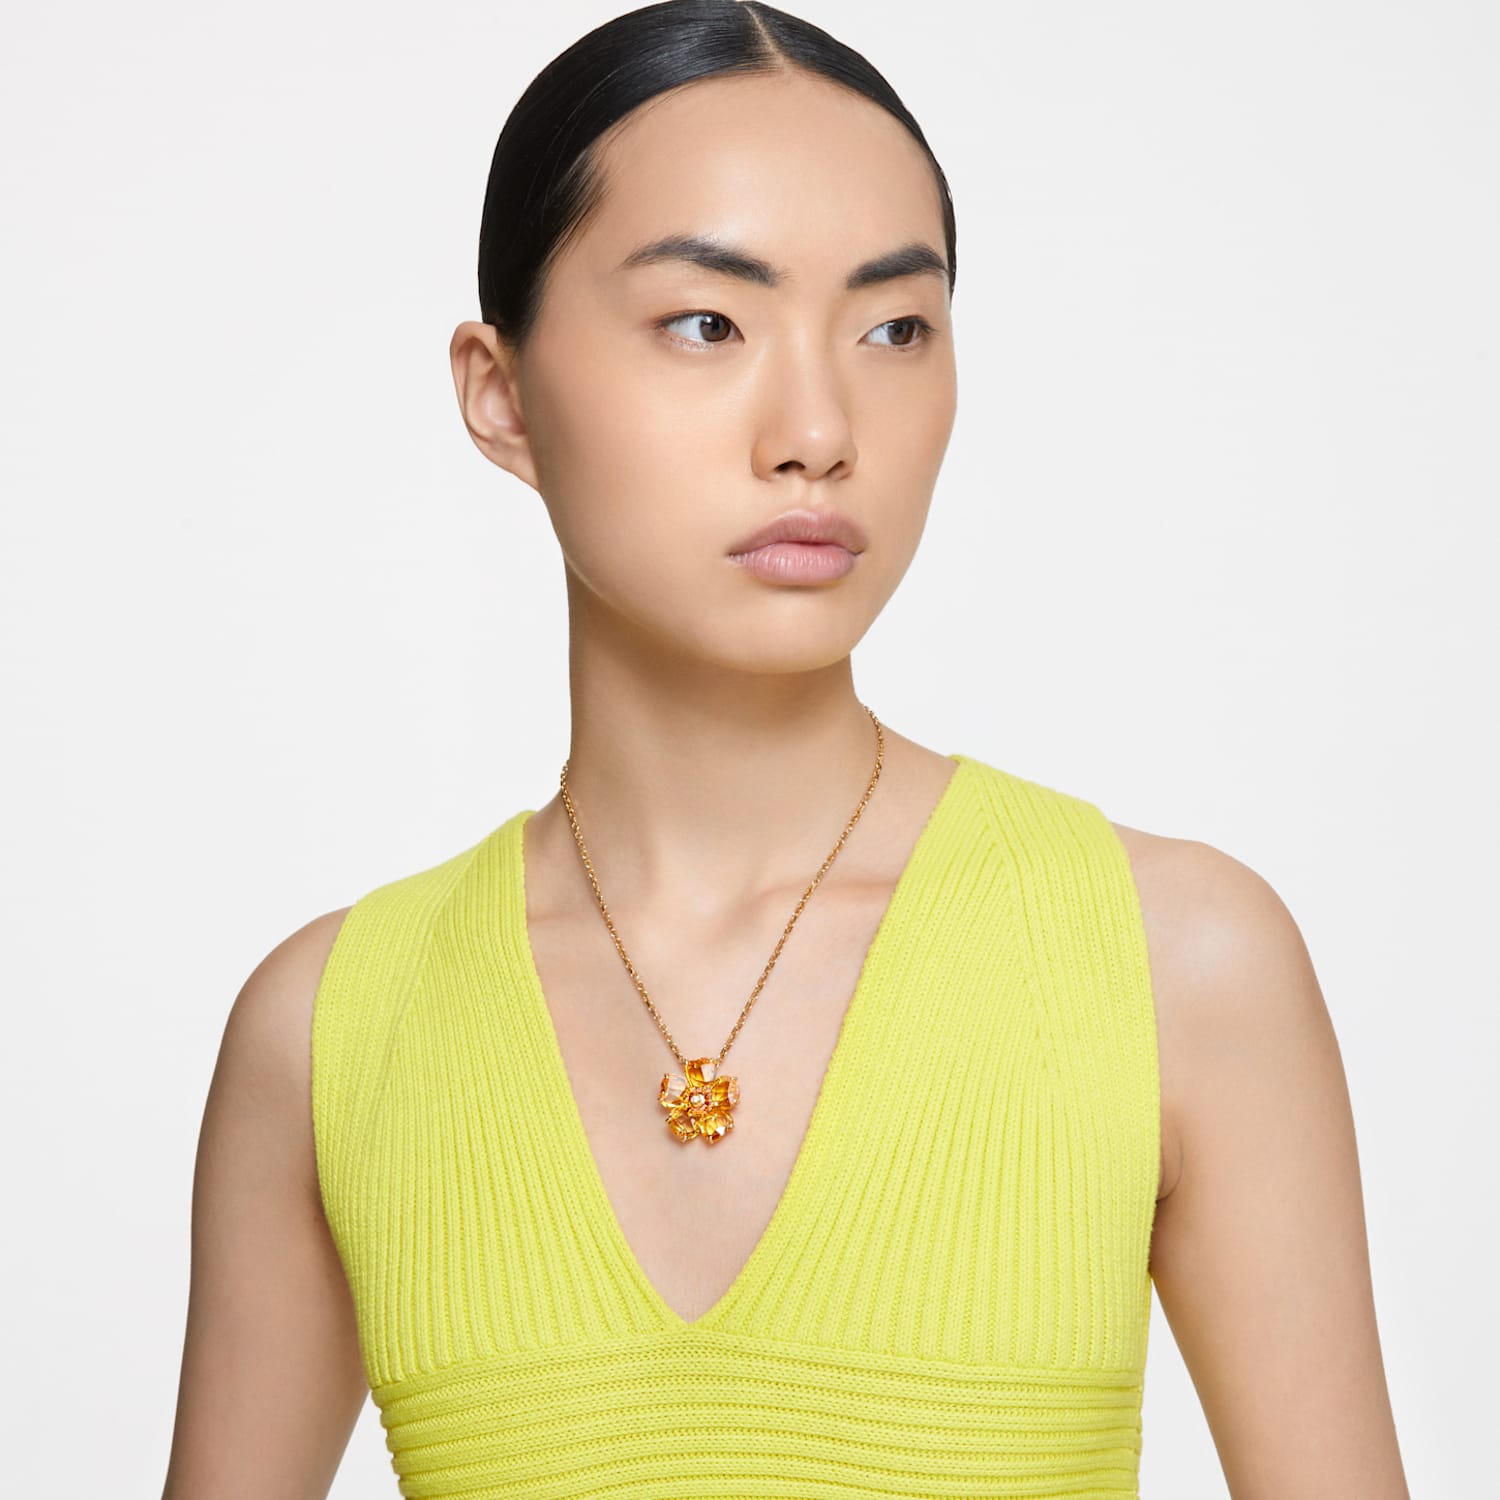 Caso Wardian verbo Competencia Florere necklace, Flower, Yellow, Gold-tone plated | Swarovski